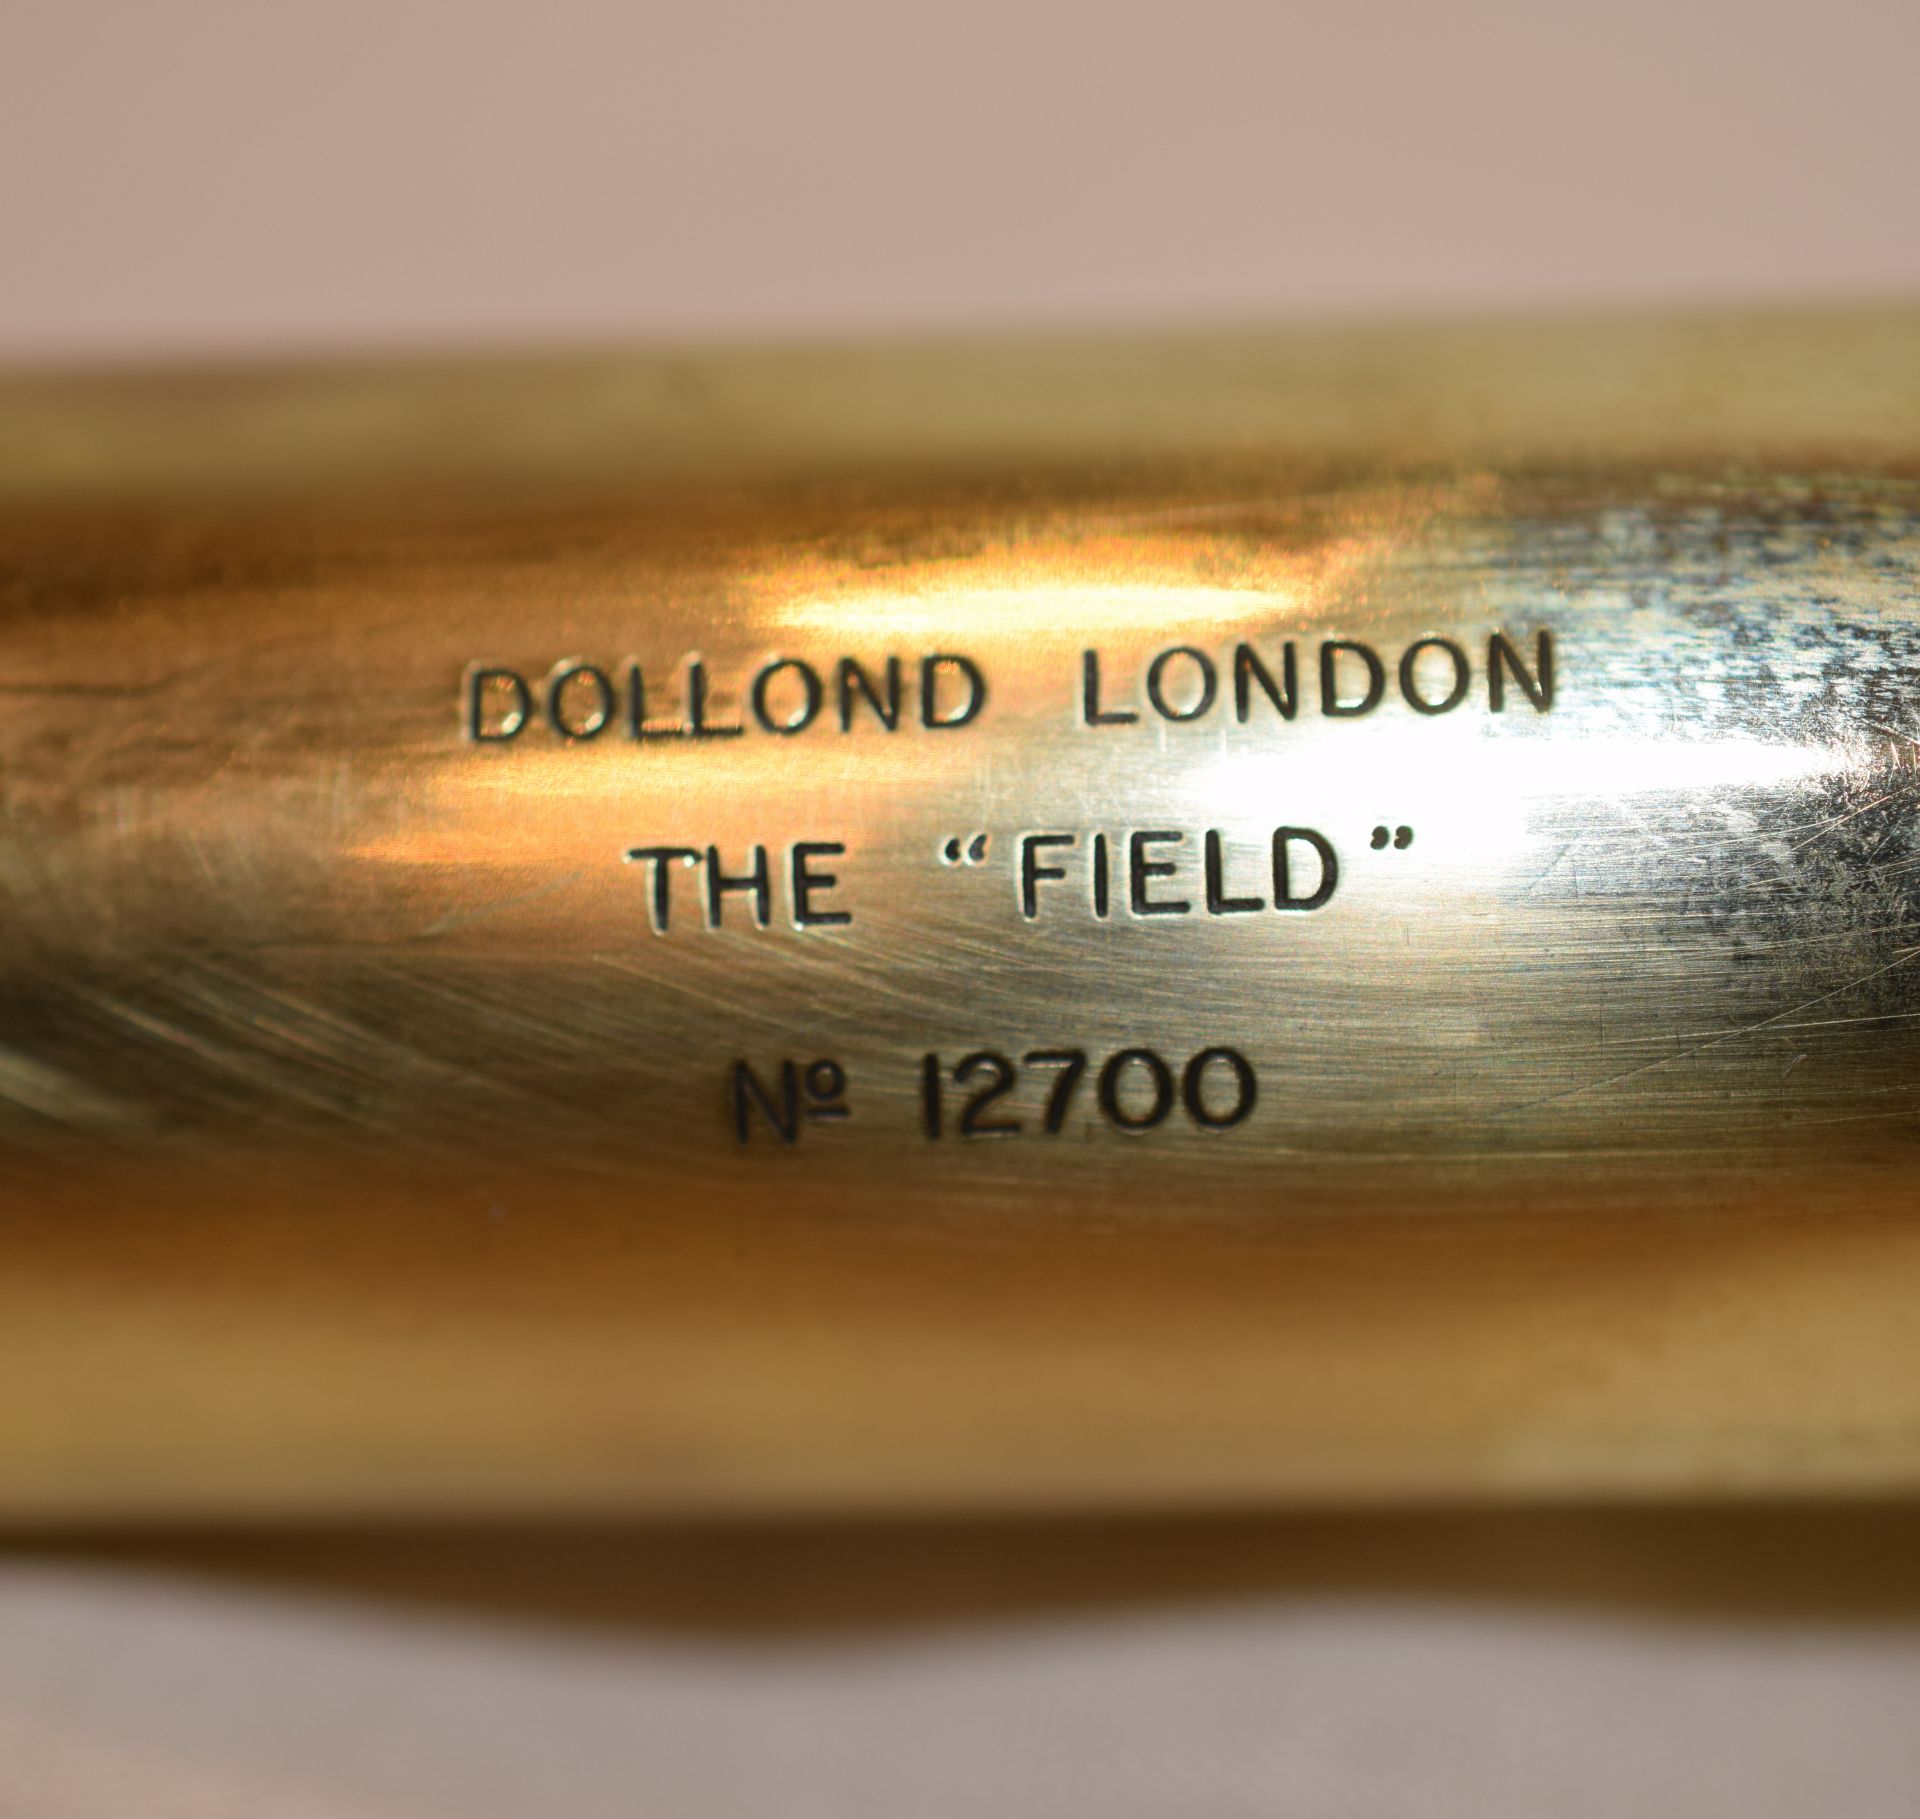 Dolland Of London 'The Field' Telescope - Image 3 of 4